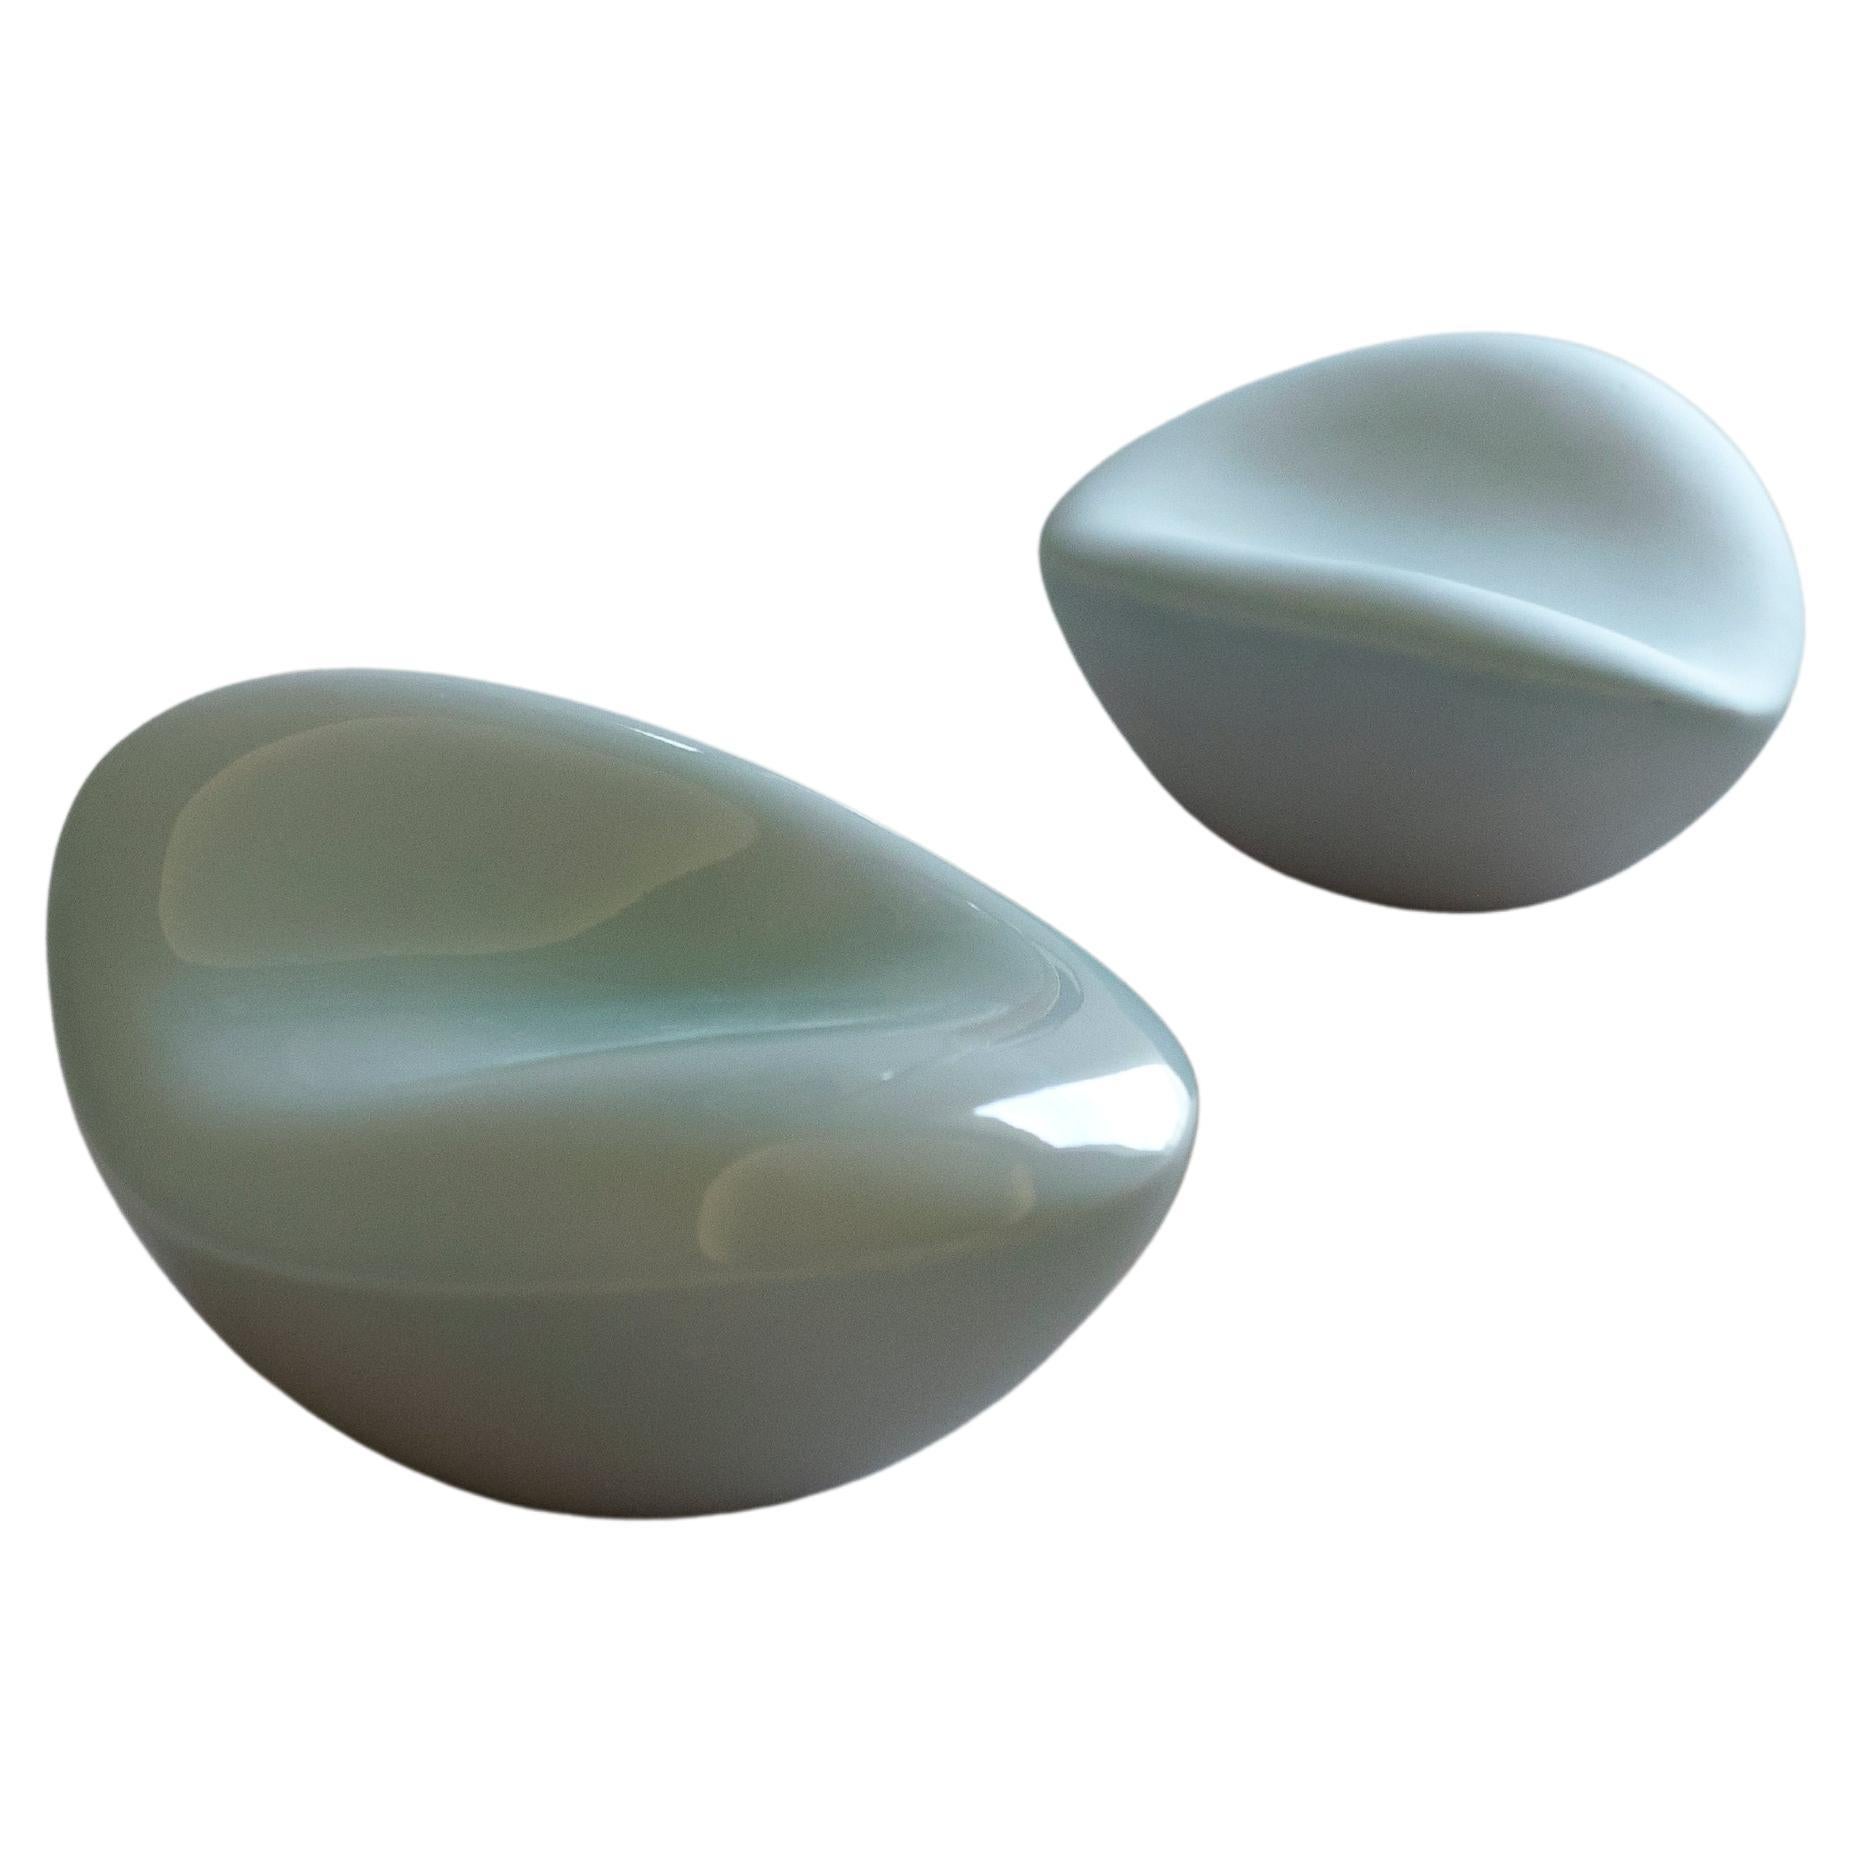 'Bean' by Soo Joo is a unique pair of abstract table sculptures, created in porcelain ceramic and Korean celadon glaze. These biophilic ceramic sculptures  have a timeless beauty that is not affected by changing trends. The sculptures fit into any